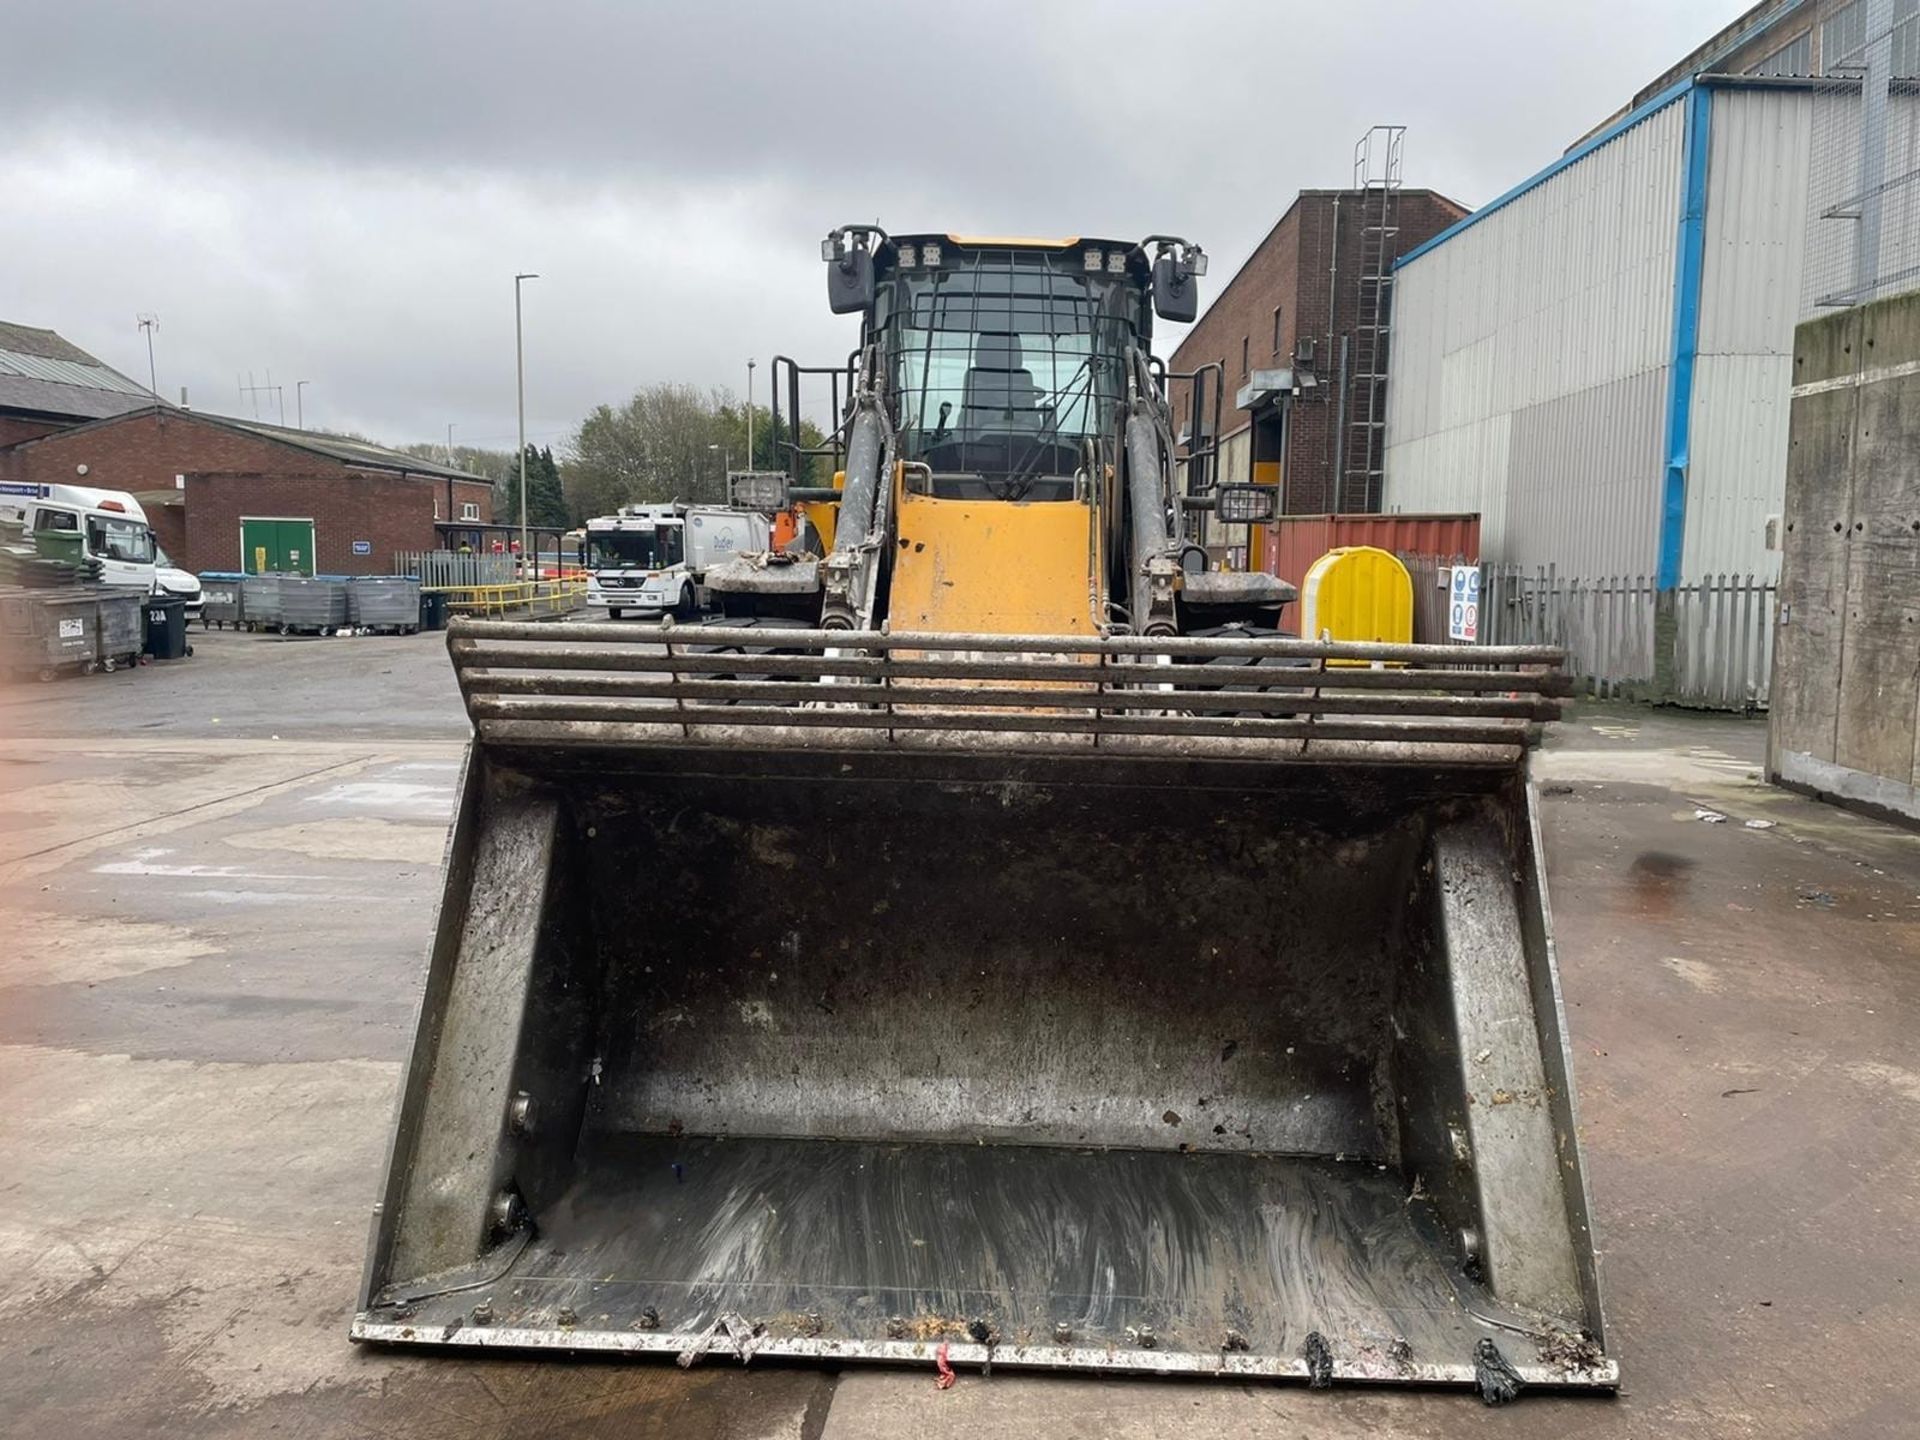 JCB, Wastemaster 437 S5, wheel loader, PIN: JCB4A8AAVK2680410 (DOM 2019), Last known Hours 3739.9, - Image 3 of 22